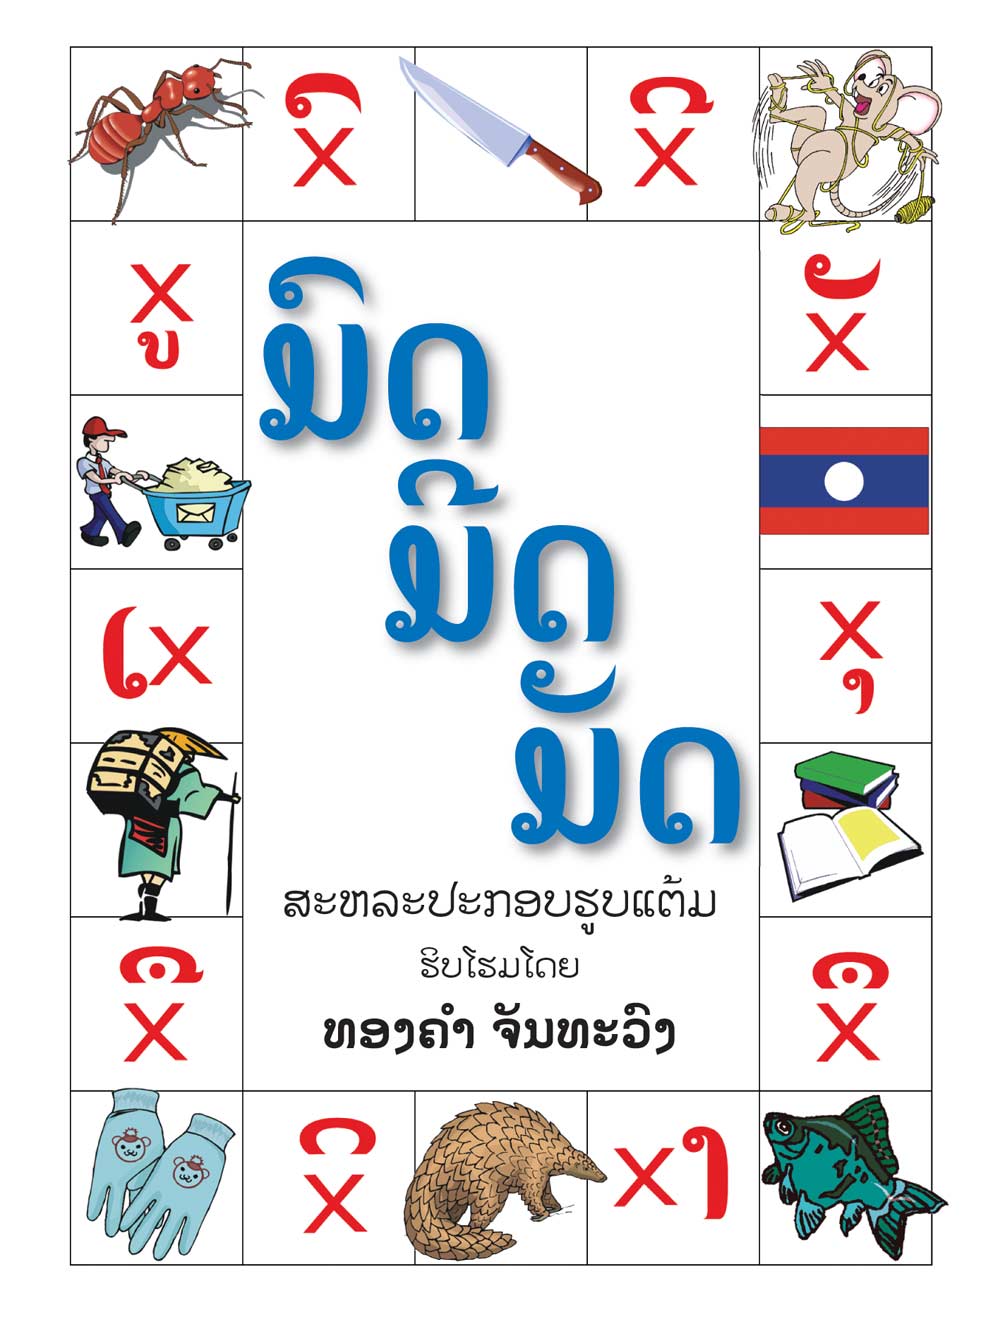 Ant, Knife, Tied Up : Mot Meet Mat large book cover, published in Lao and English